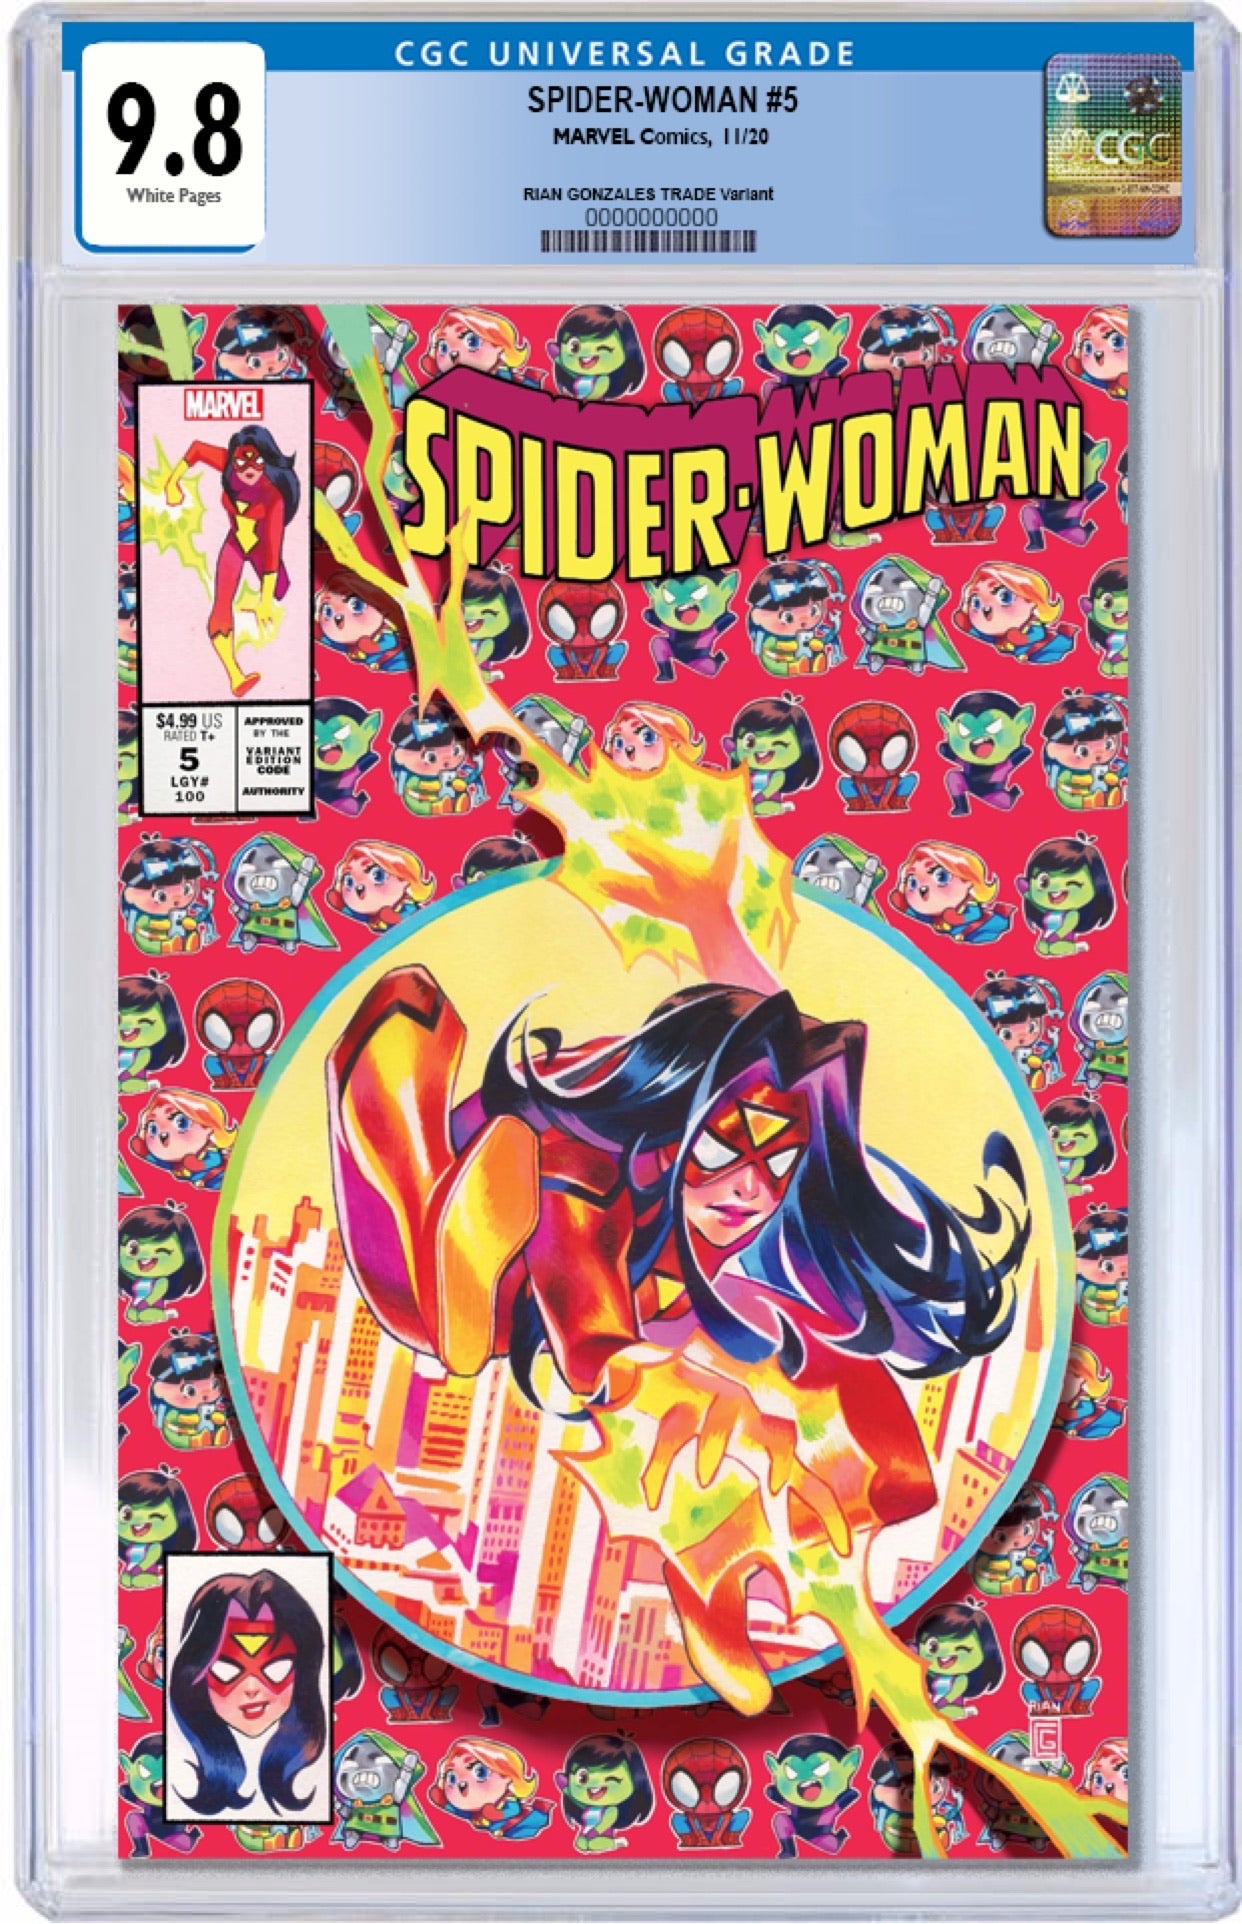 SPIDER-WOMAN #5 RIAN GONZALES EXCLUSIVE VARIANT CGC OPTIONS